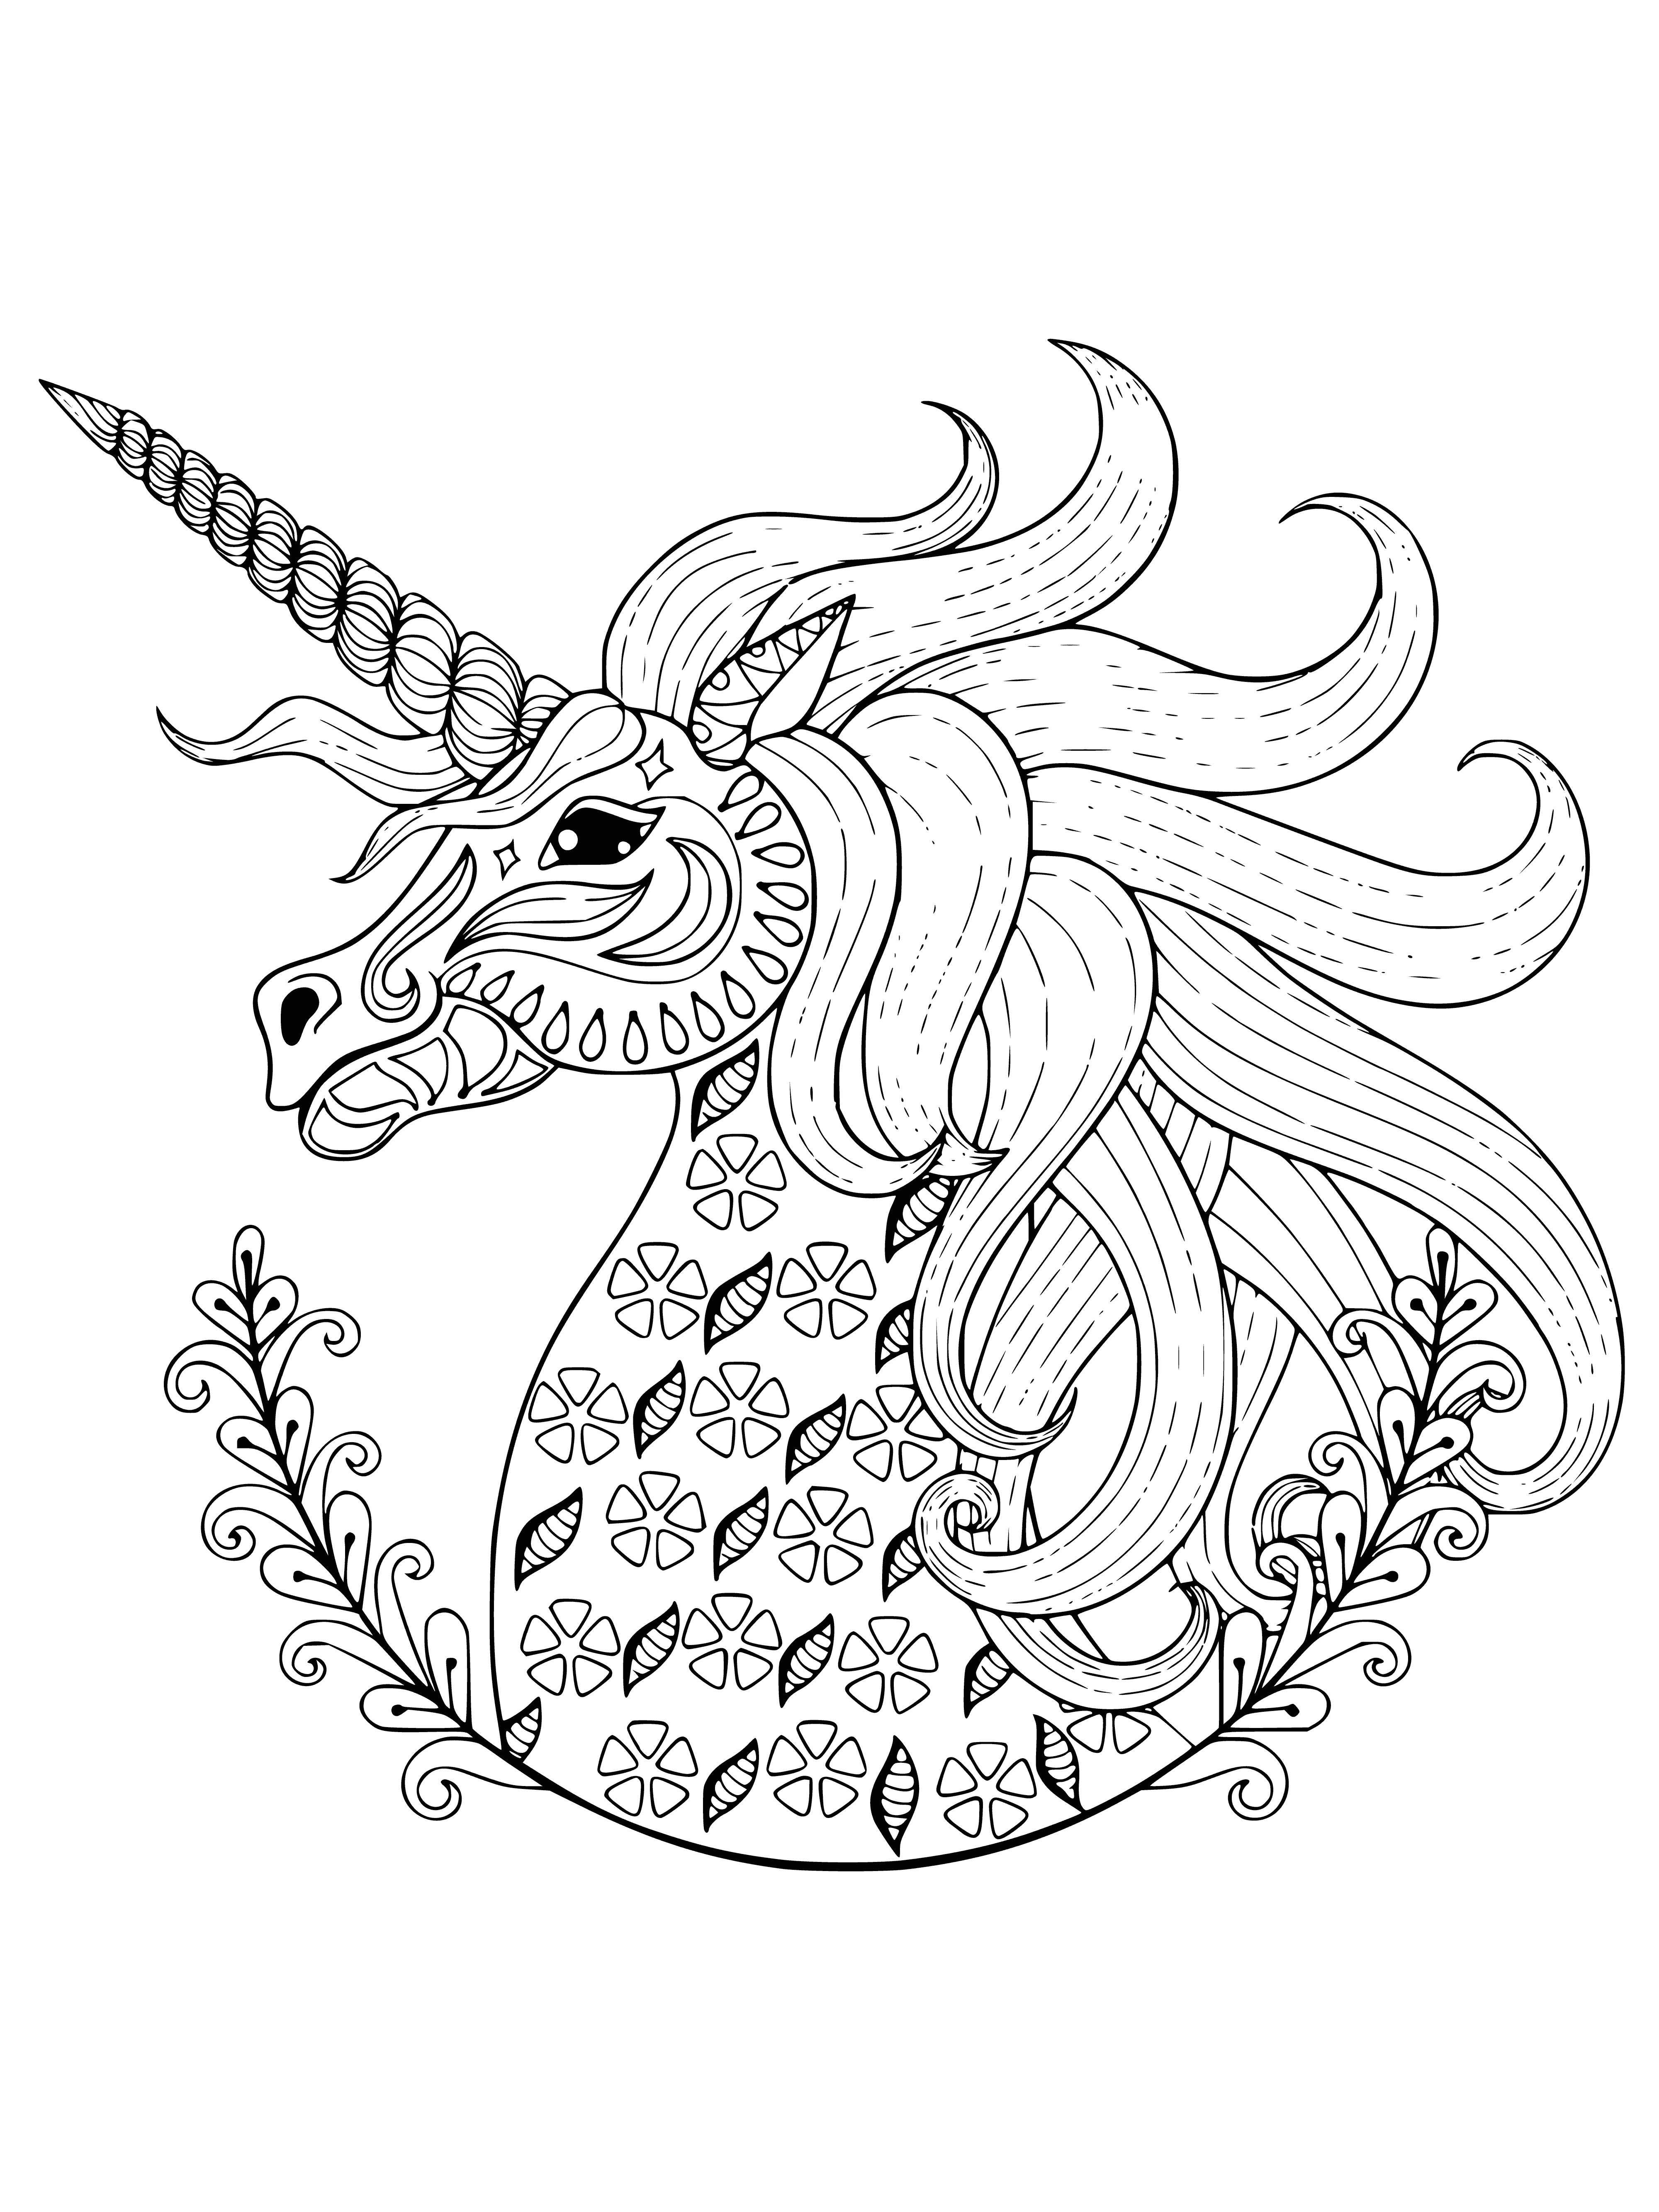 coloring page: A white unicorn with a pink mane and tail, gold horn and hooves, looking at the viewer, amidst a field of flowers, next to a tree.